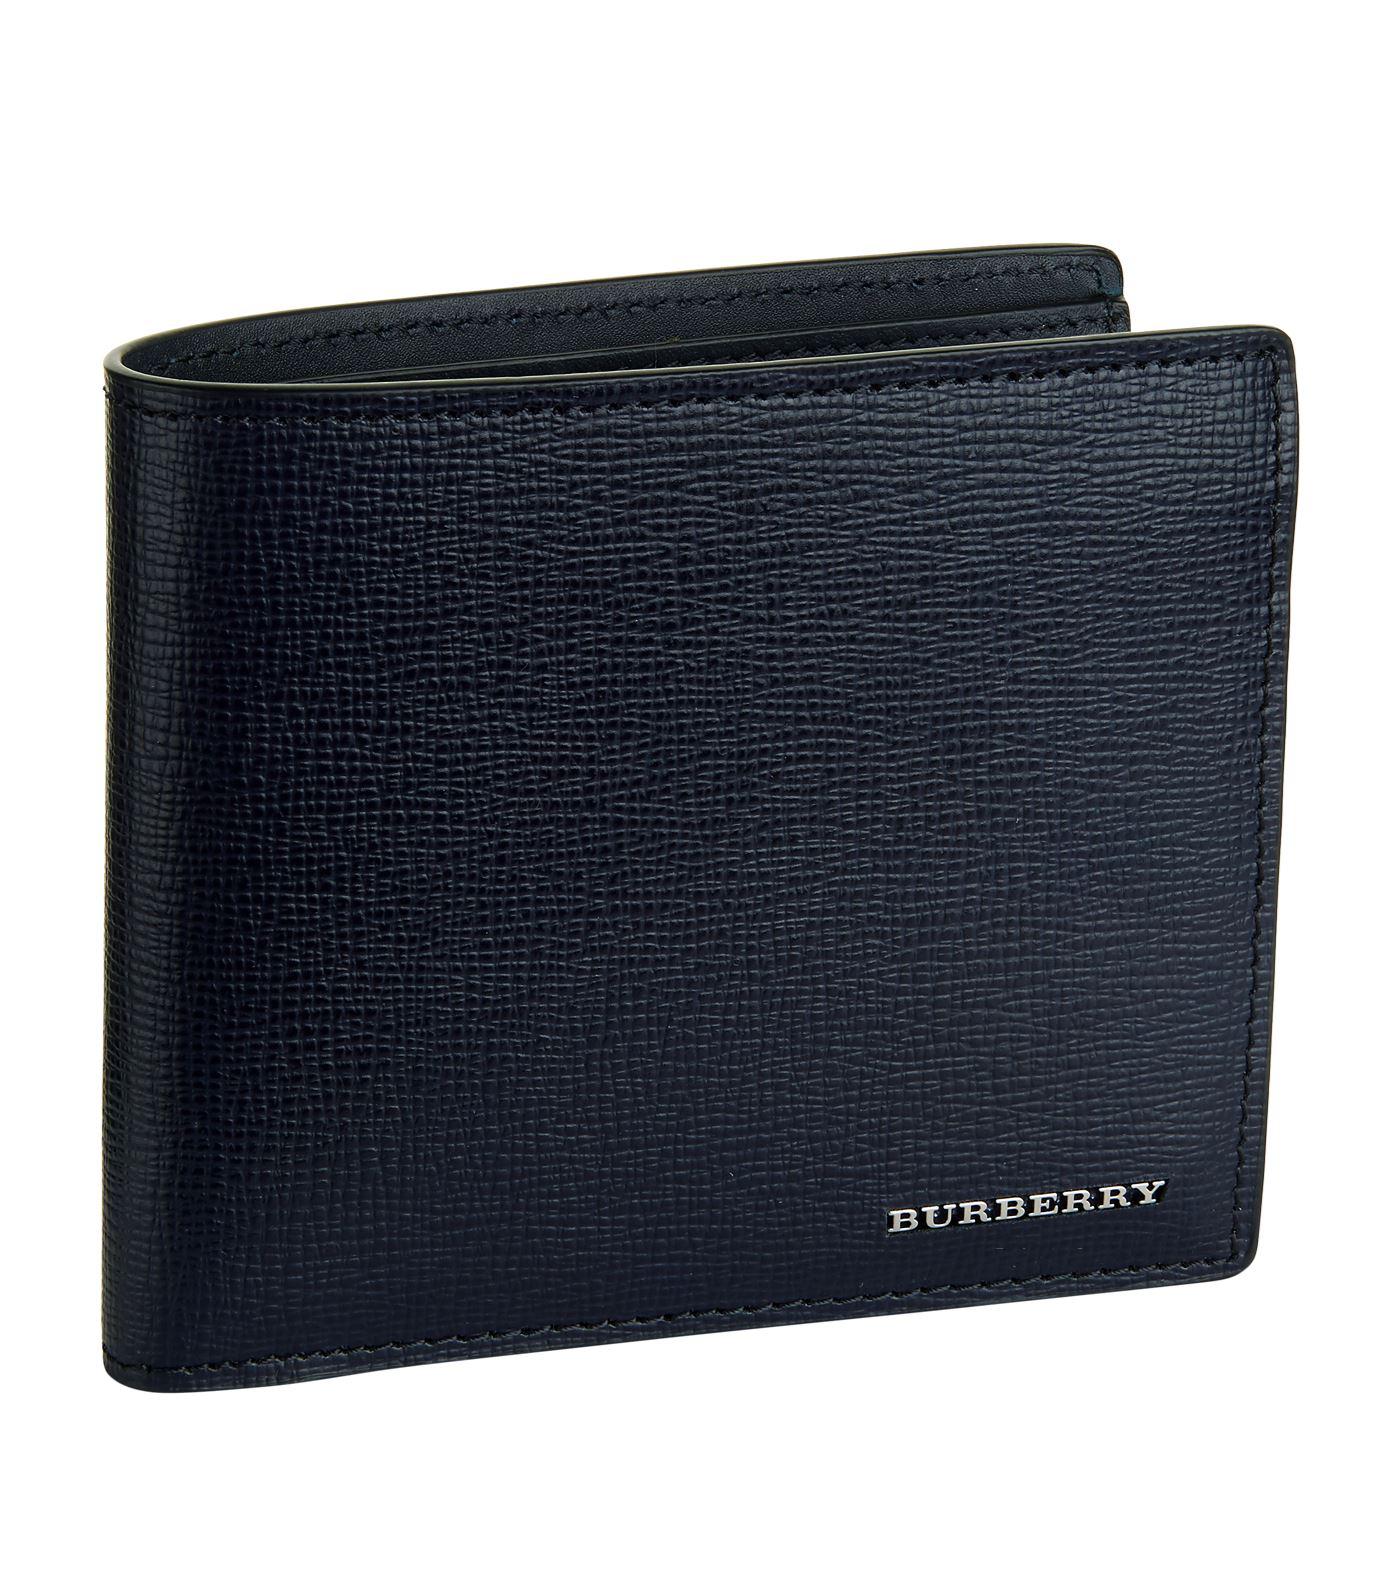 Lyst - Burberry London Leather Bifold Wallet in Blue for Men